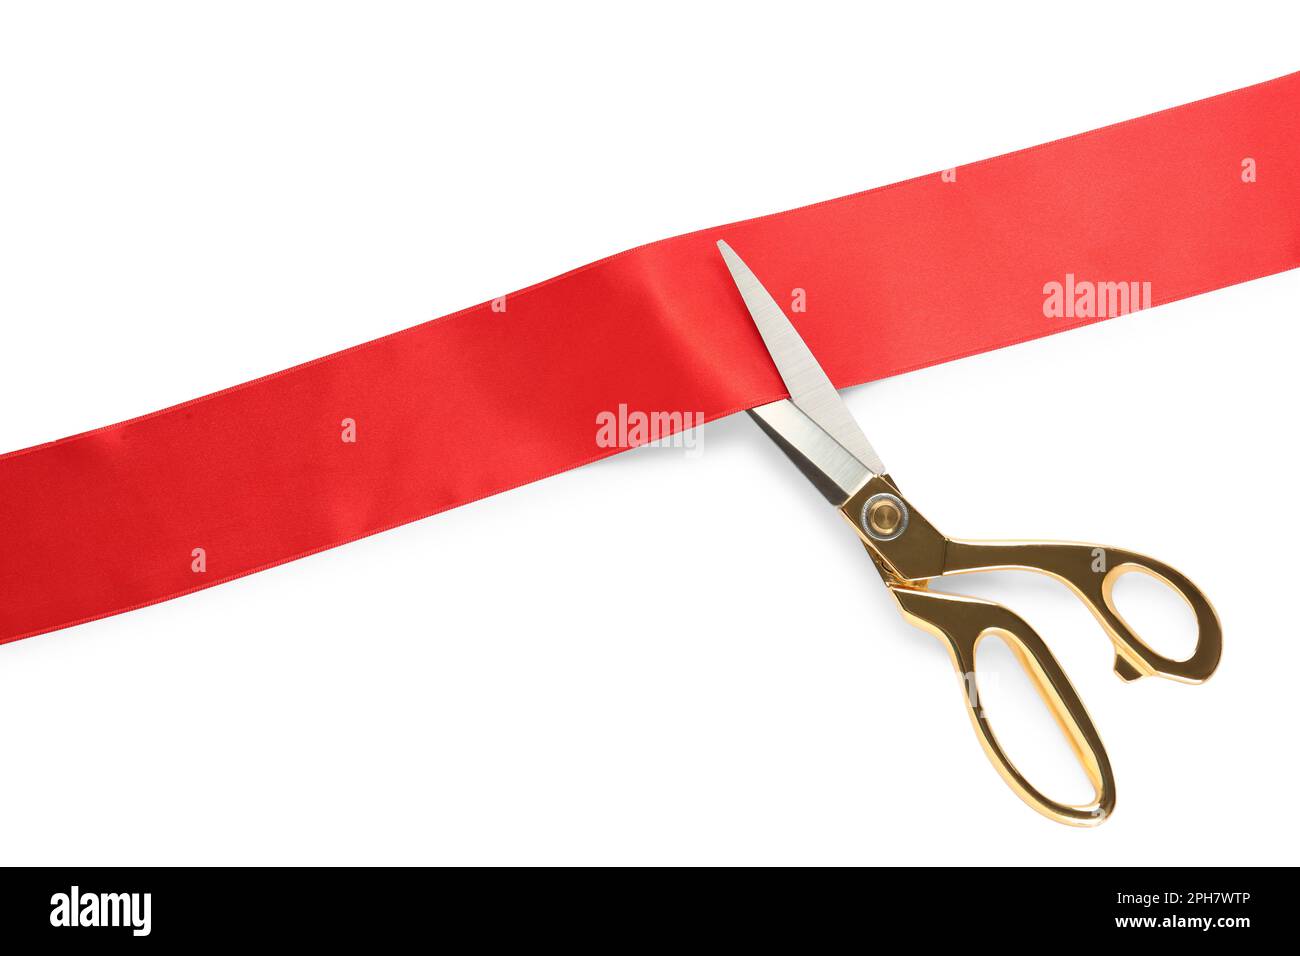 Ribbon Cuttings: A History of Ceremonial Scissors